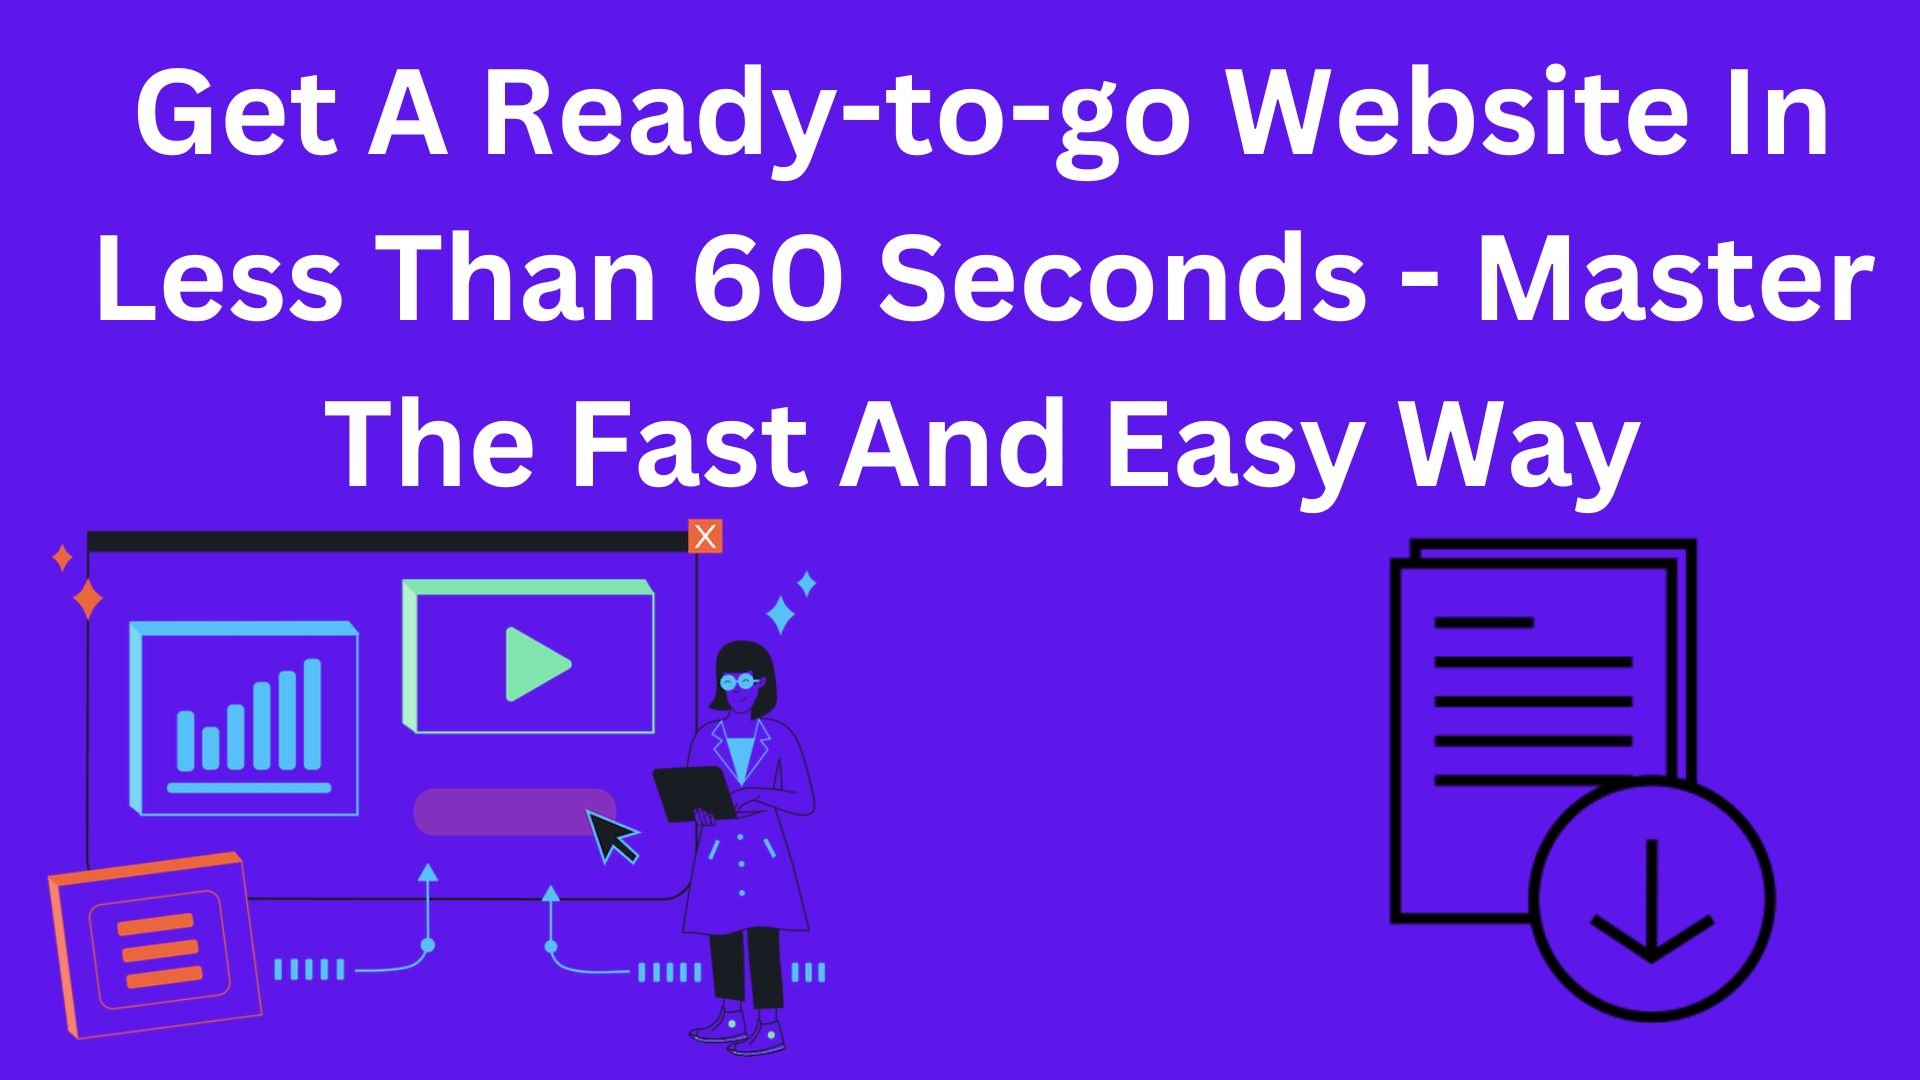 Get A Ready-To-Go Website In Less Than 60 Seconds - Master The Fast And Easy Way